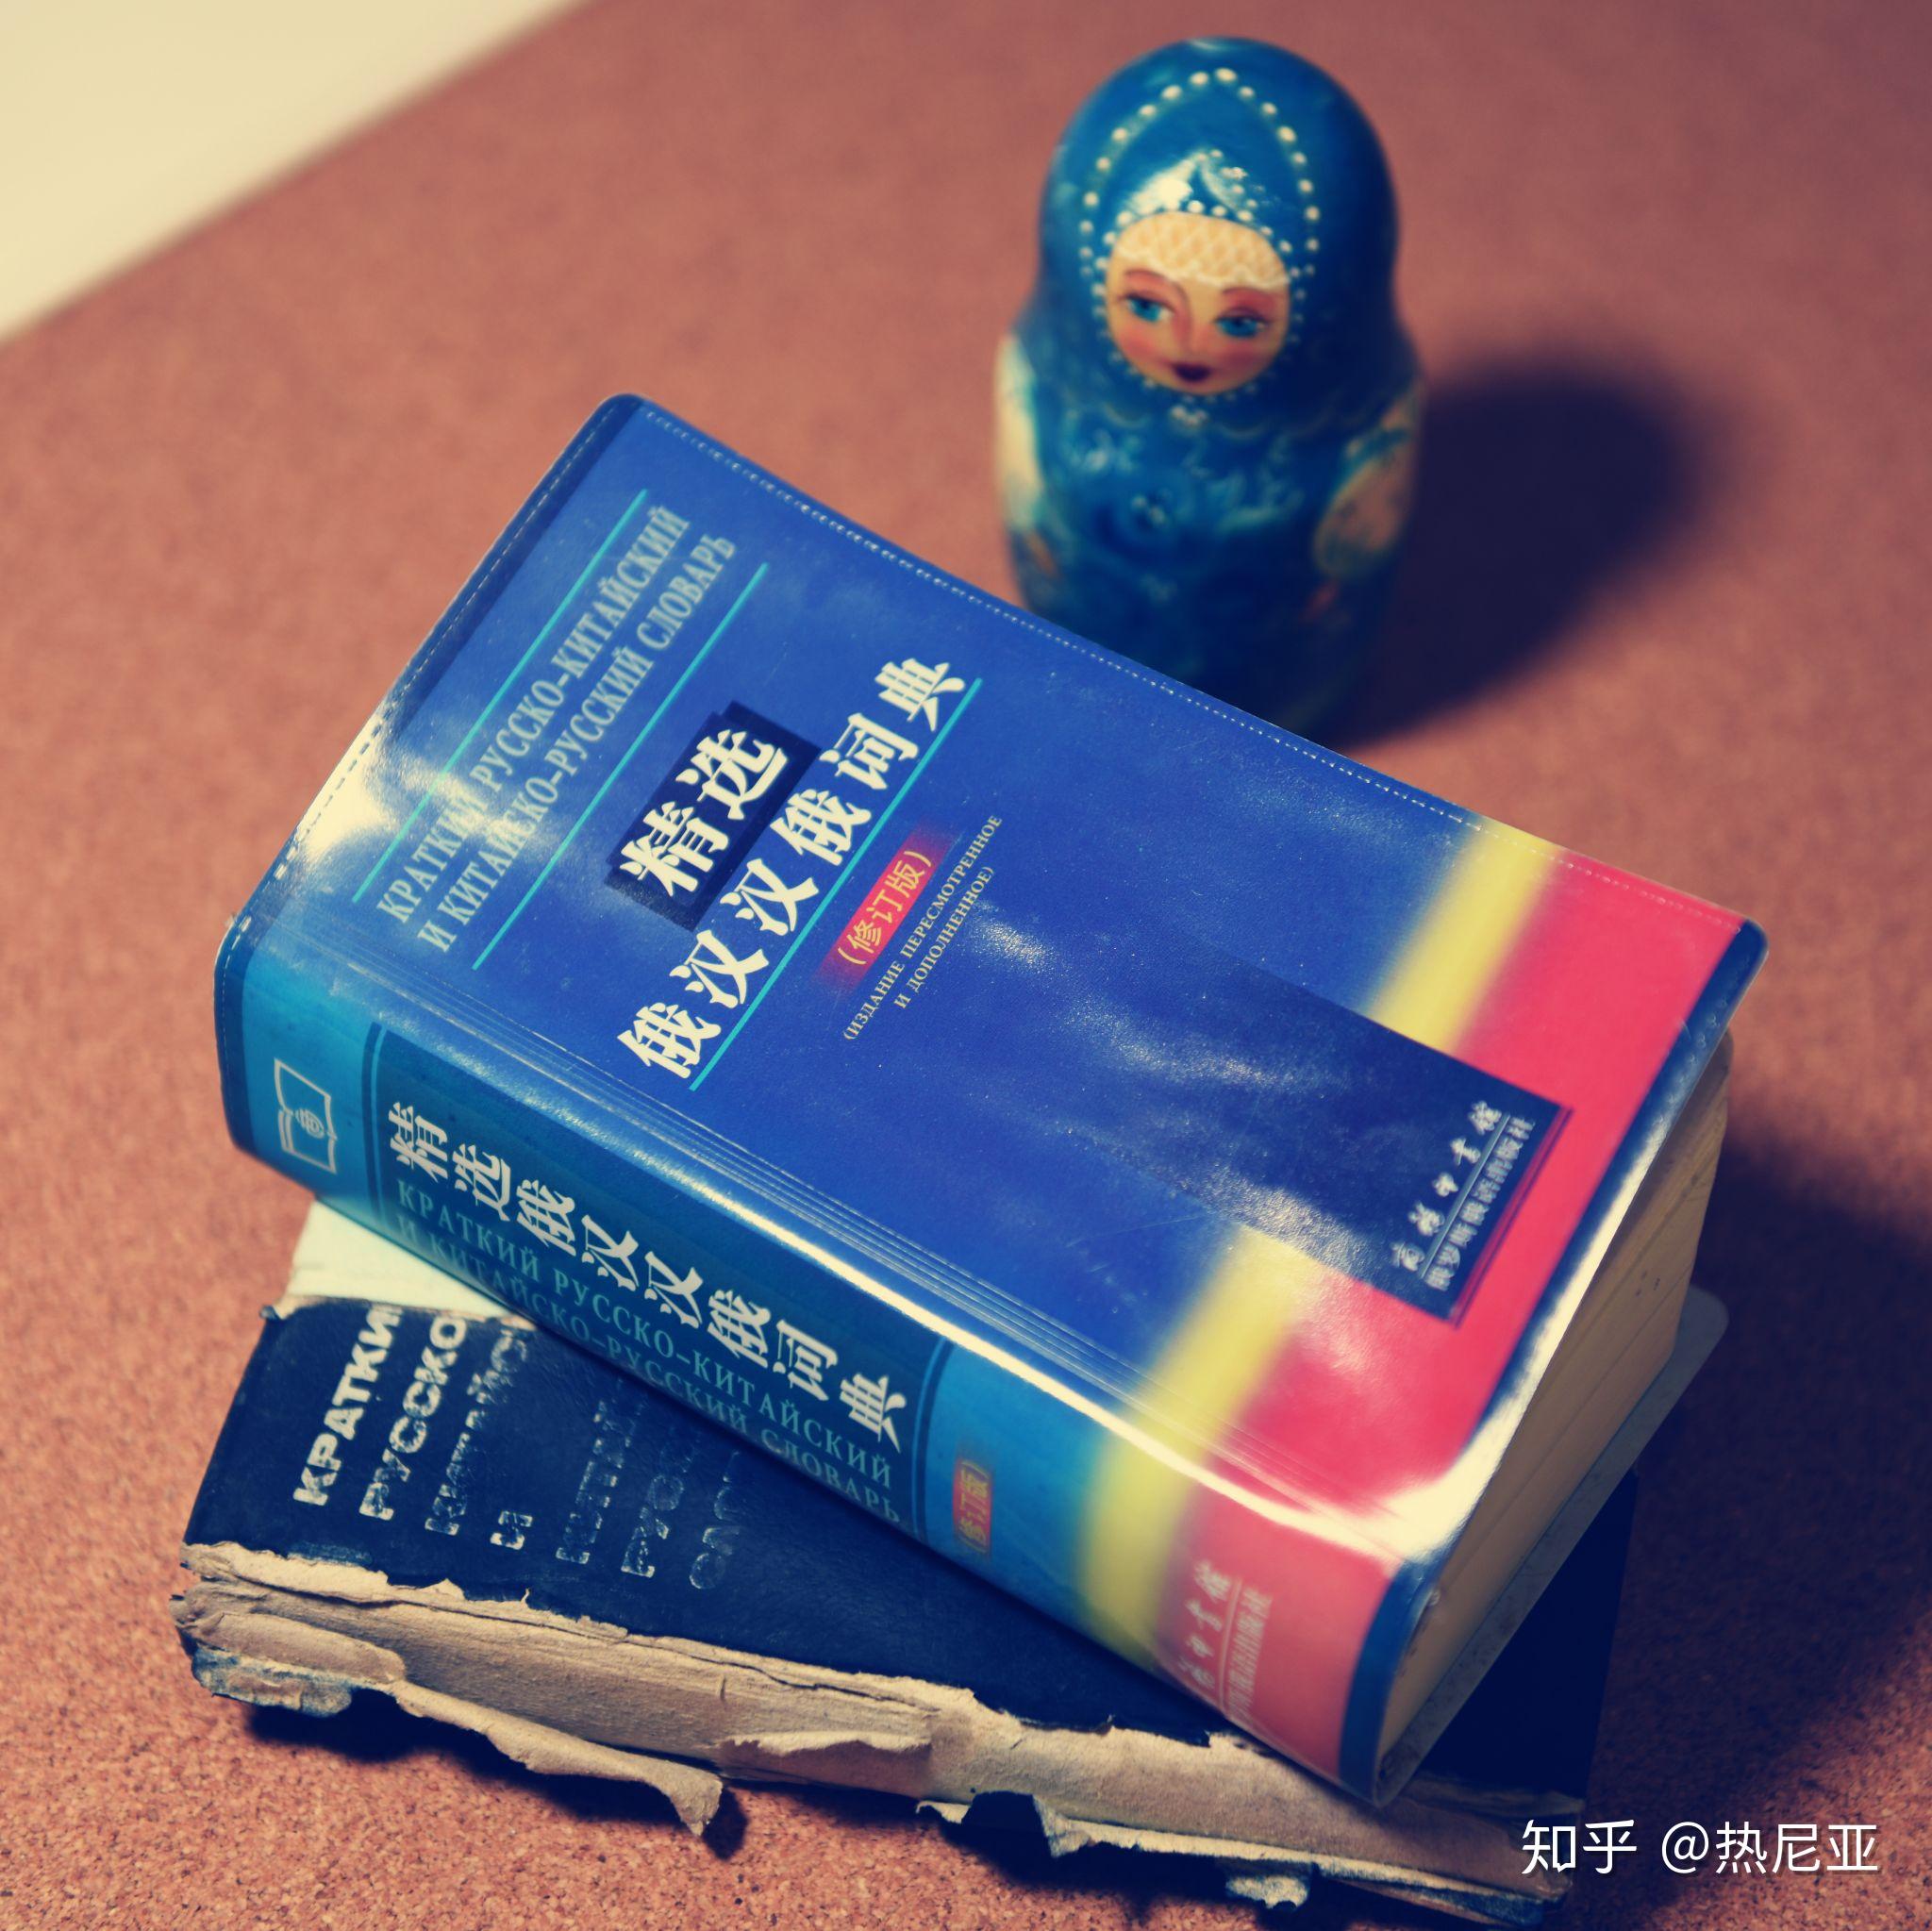 Oxford Advanced Learner's English-Chinese Dictionary牛津高阶英汉双解词典 by 霍恩比 (A.S.Hornby) | Goodreads